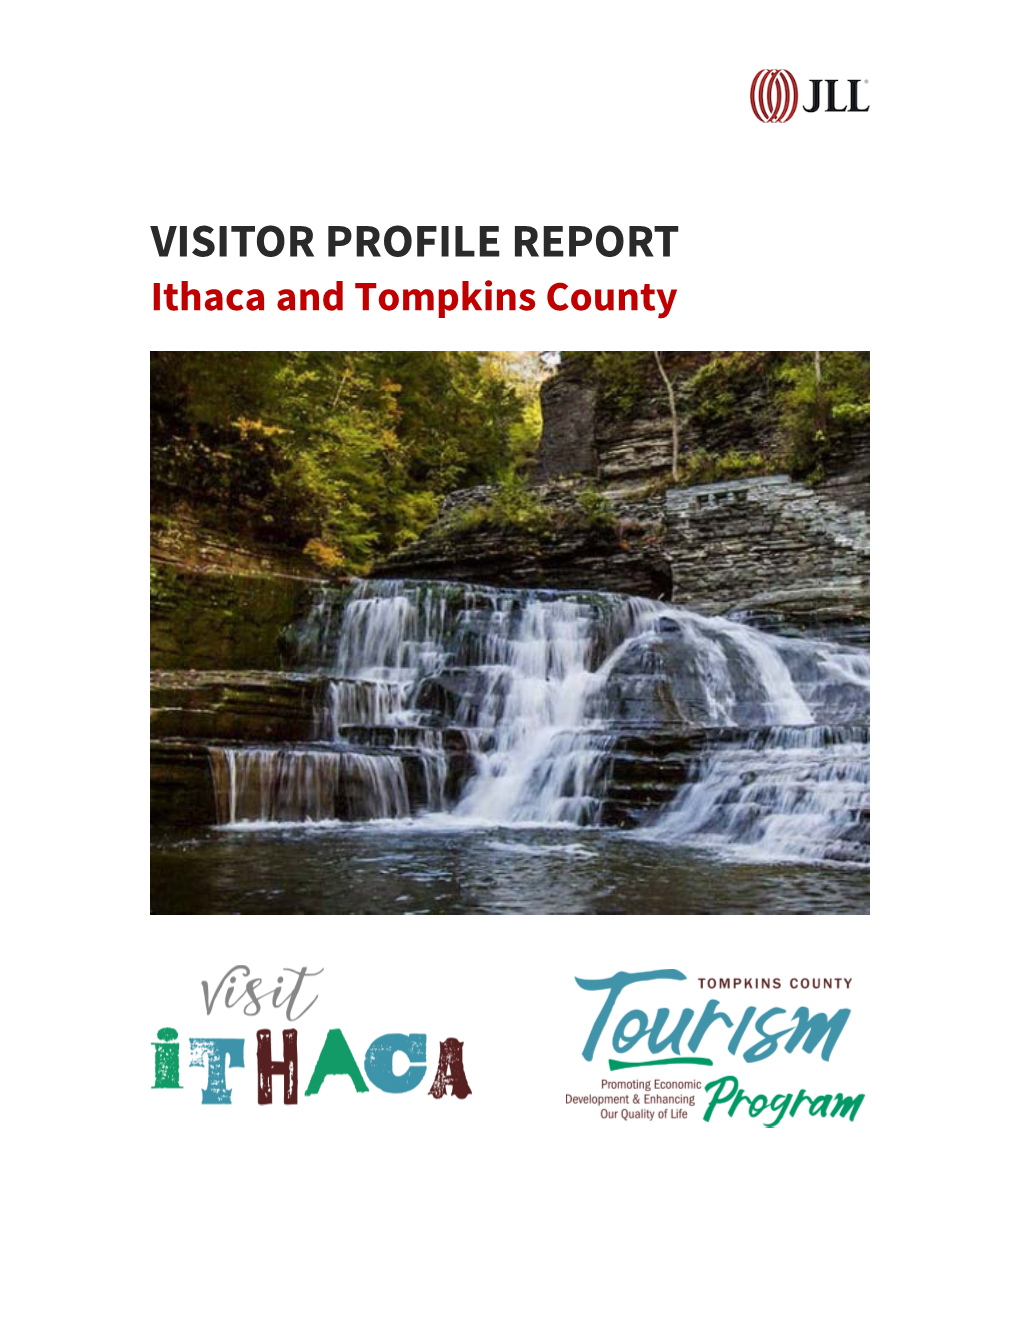 Visitor Profile Study Was Conducted Over the Course of 18 Months, from January 2018 to July 2019, and Was Comprised of Comprehensive Primary Research